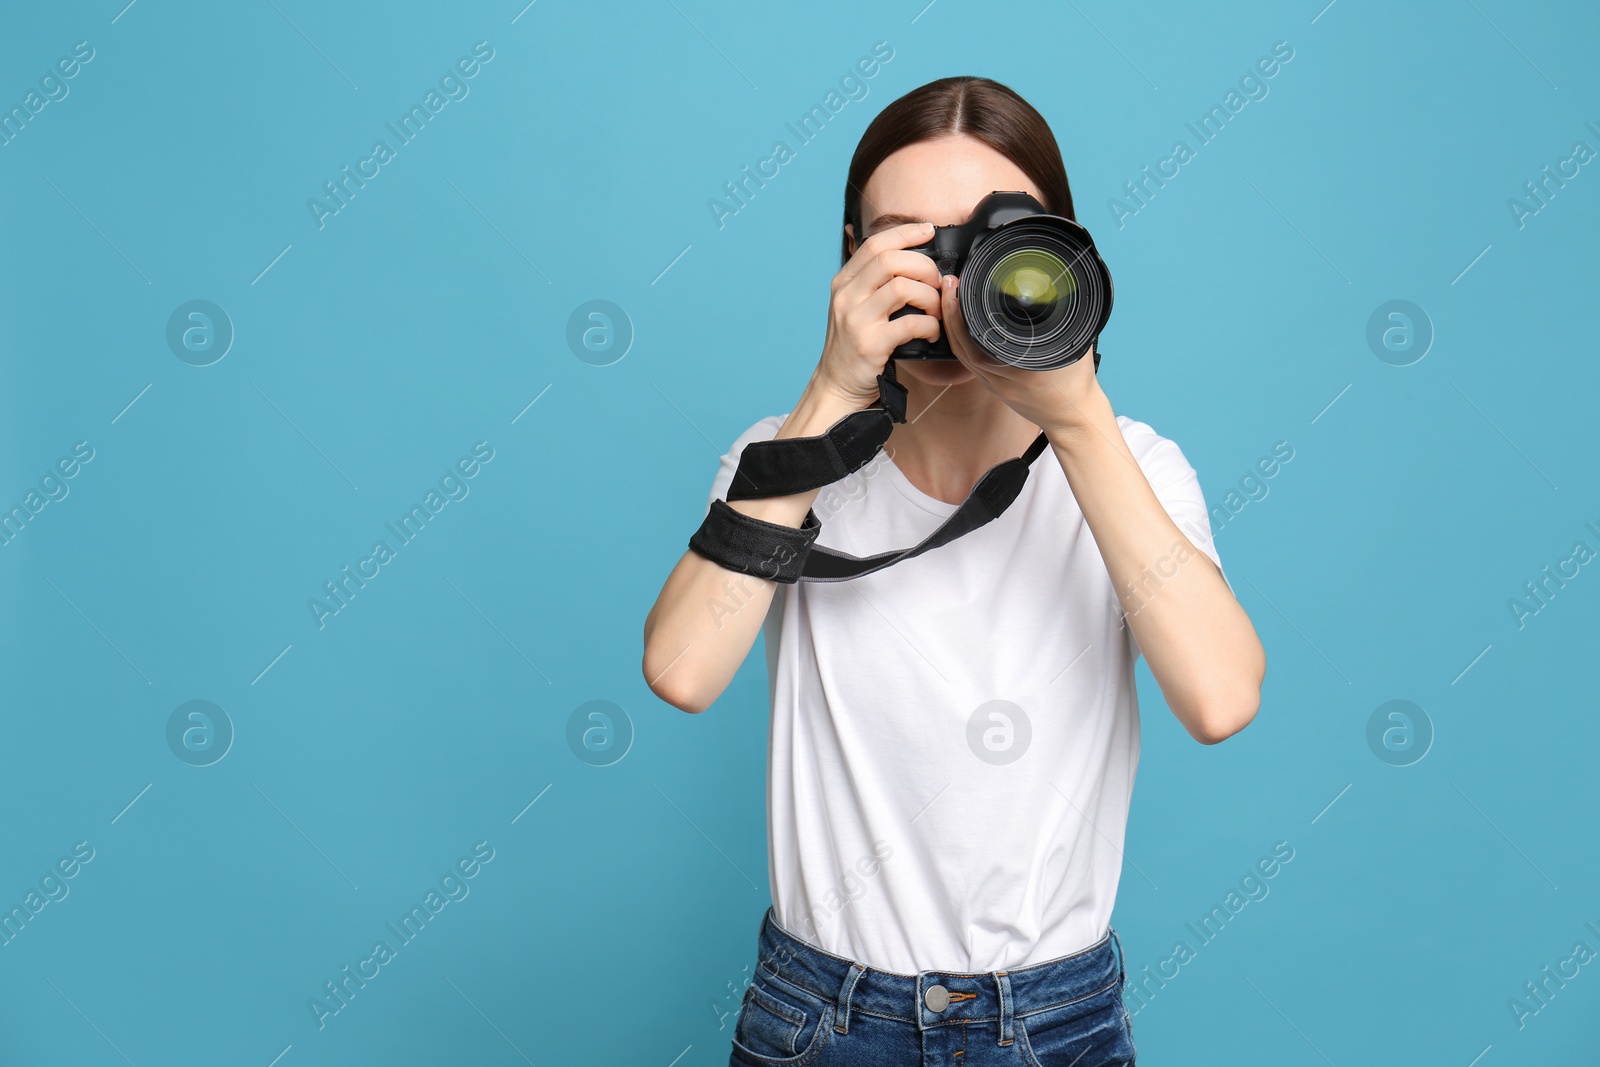 Photo of Professional photographer taking picture on light blue background